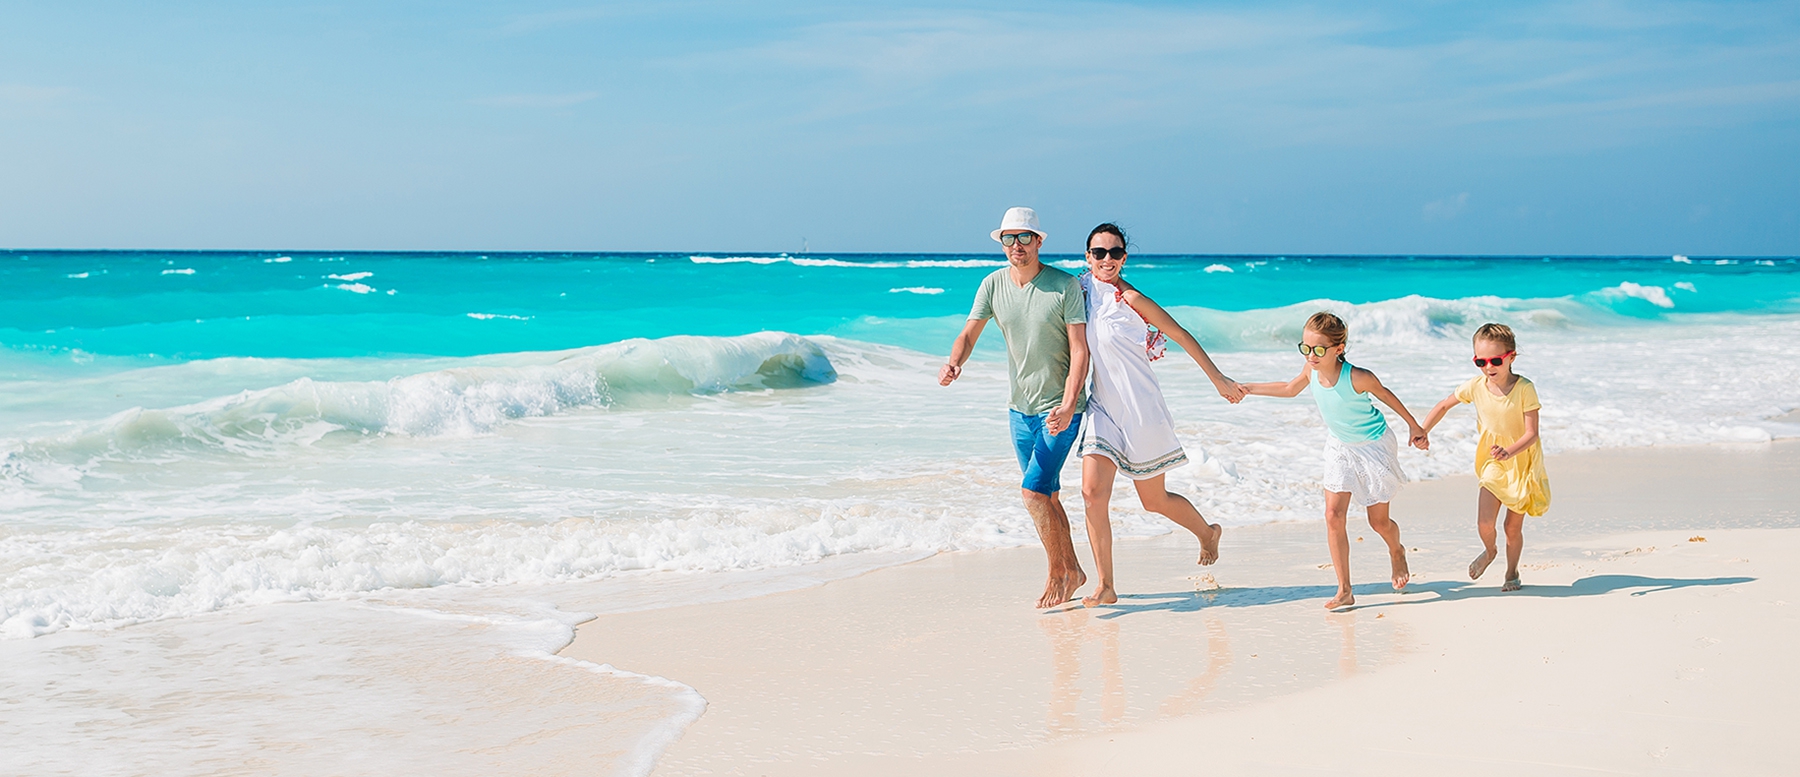 Five Financial Tips for Vacation Planning